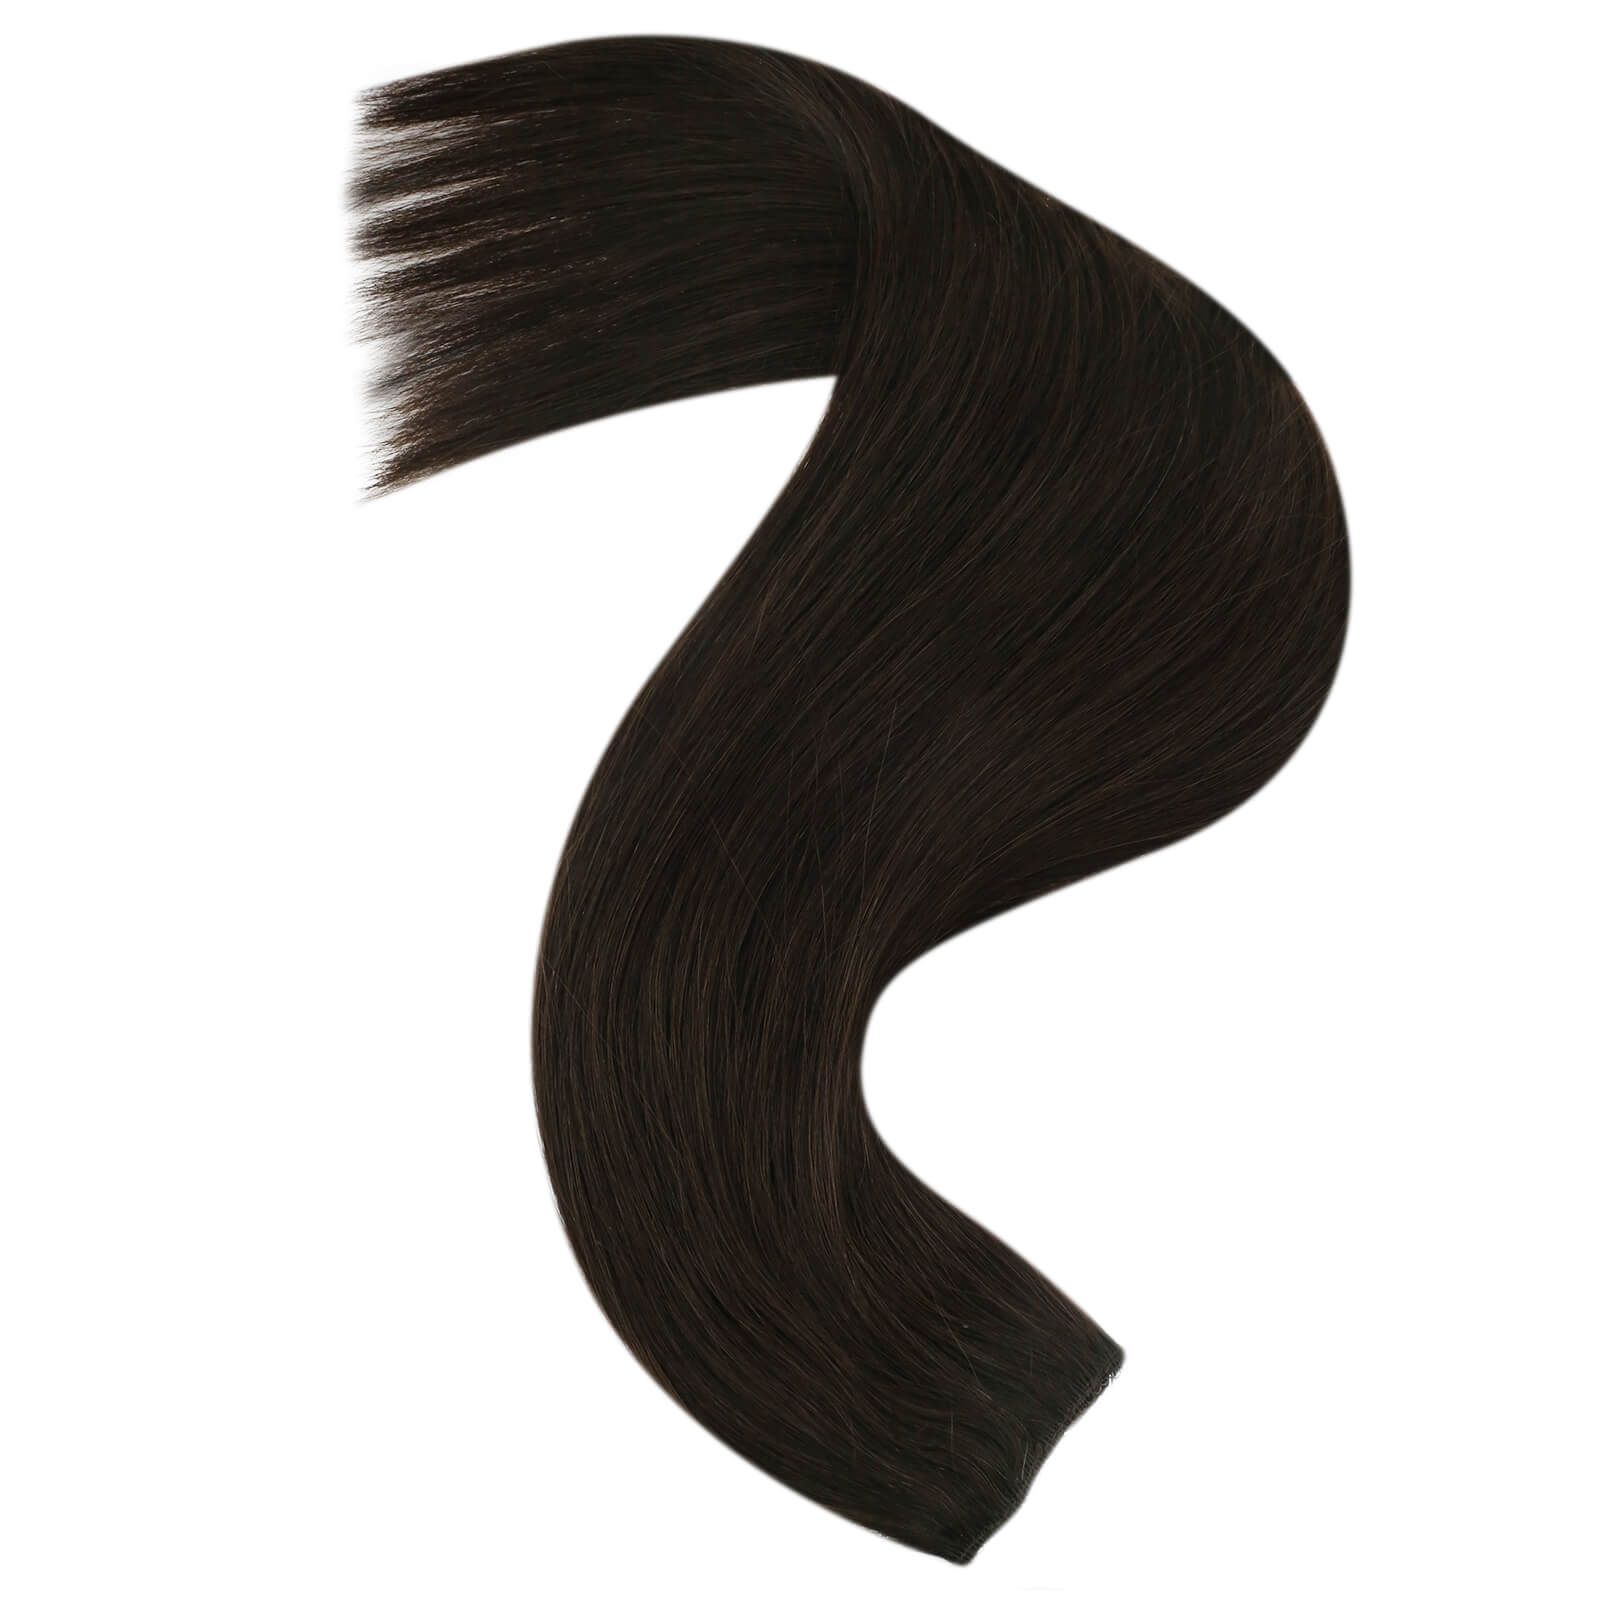 Wire Hair Extensions Human Hair Wire Extensions Darkest Brown #2 |Youngsee